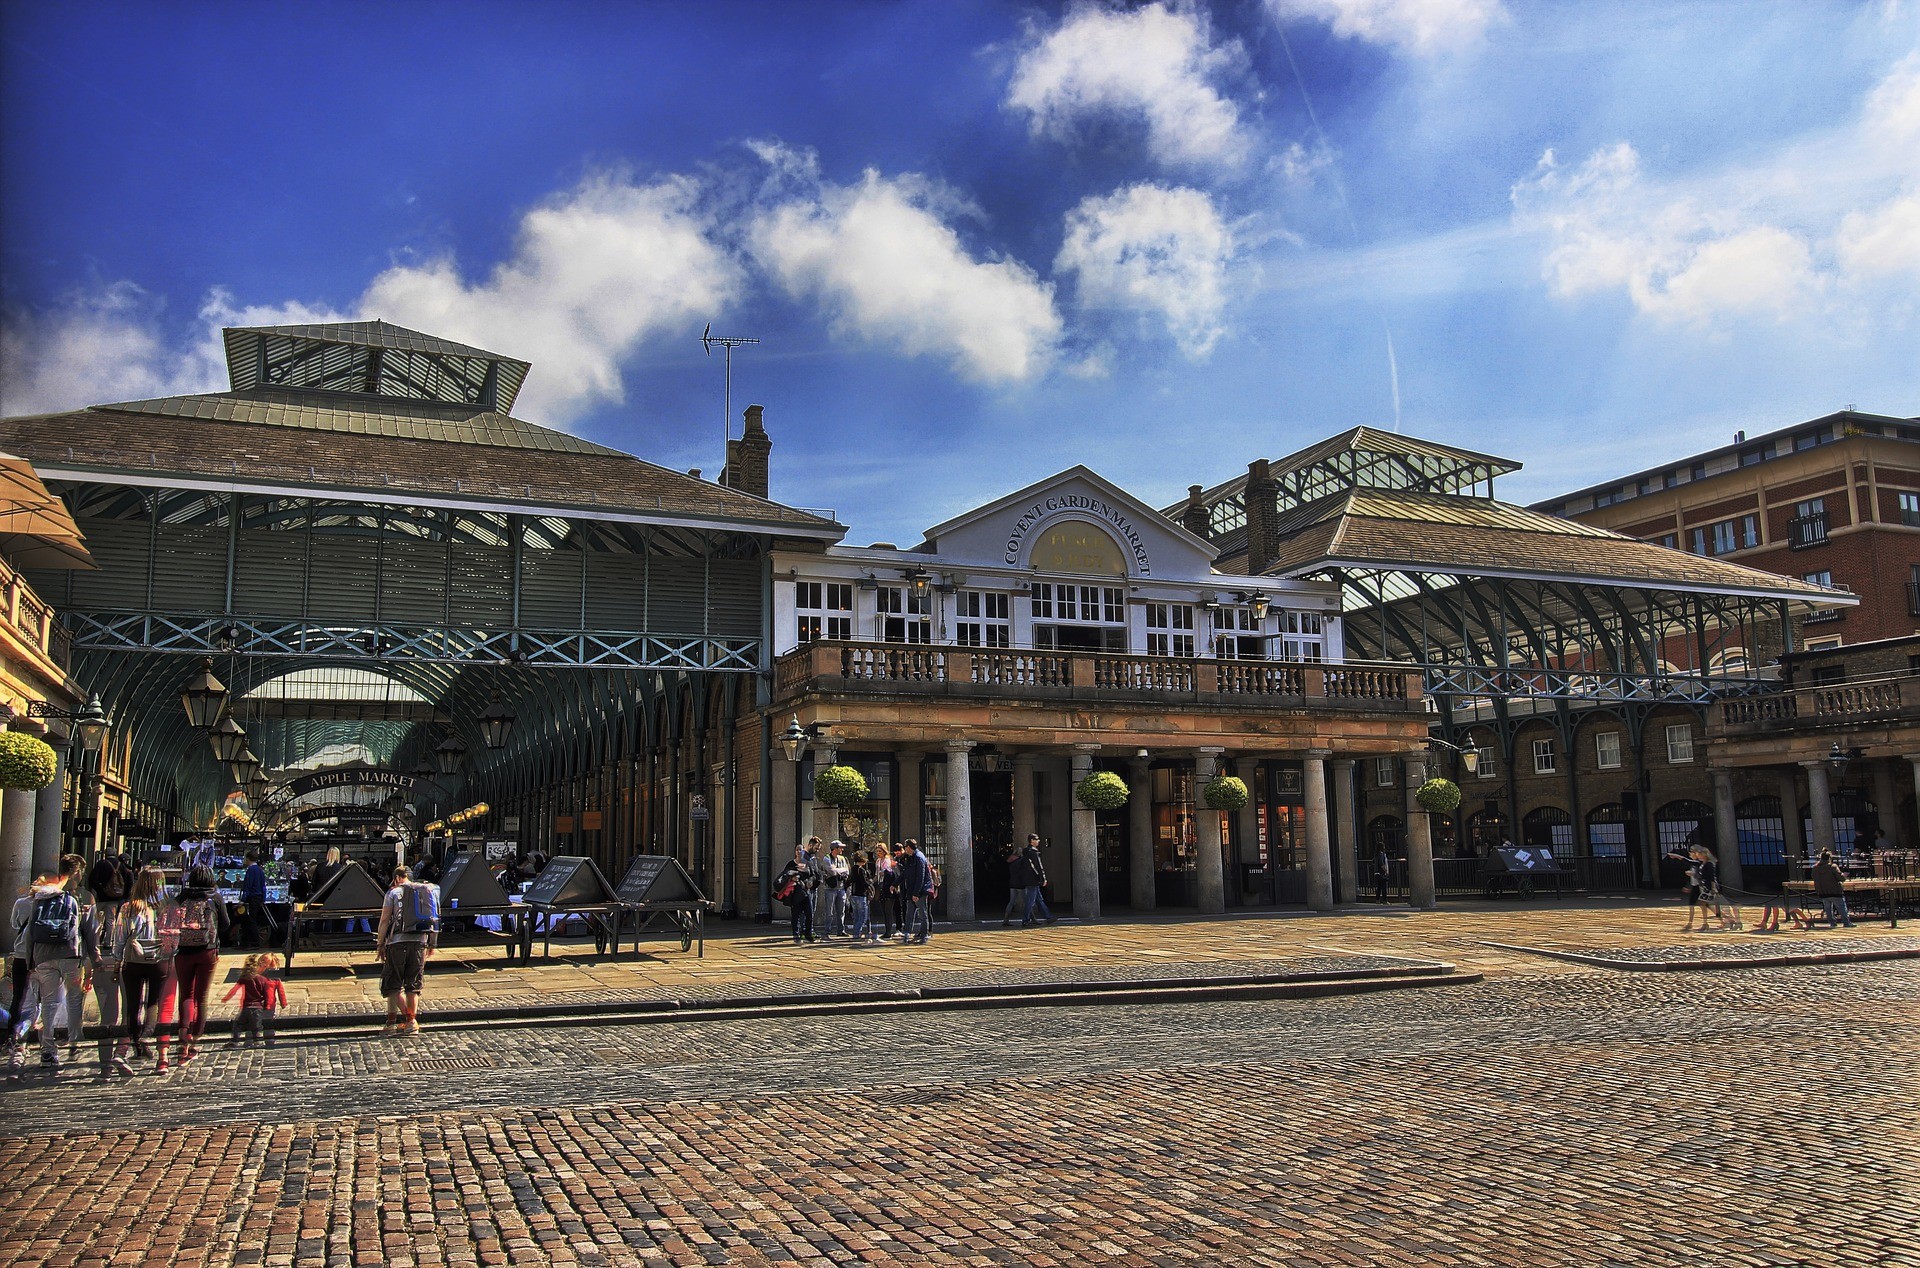 5 markets in London that you need to check out